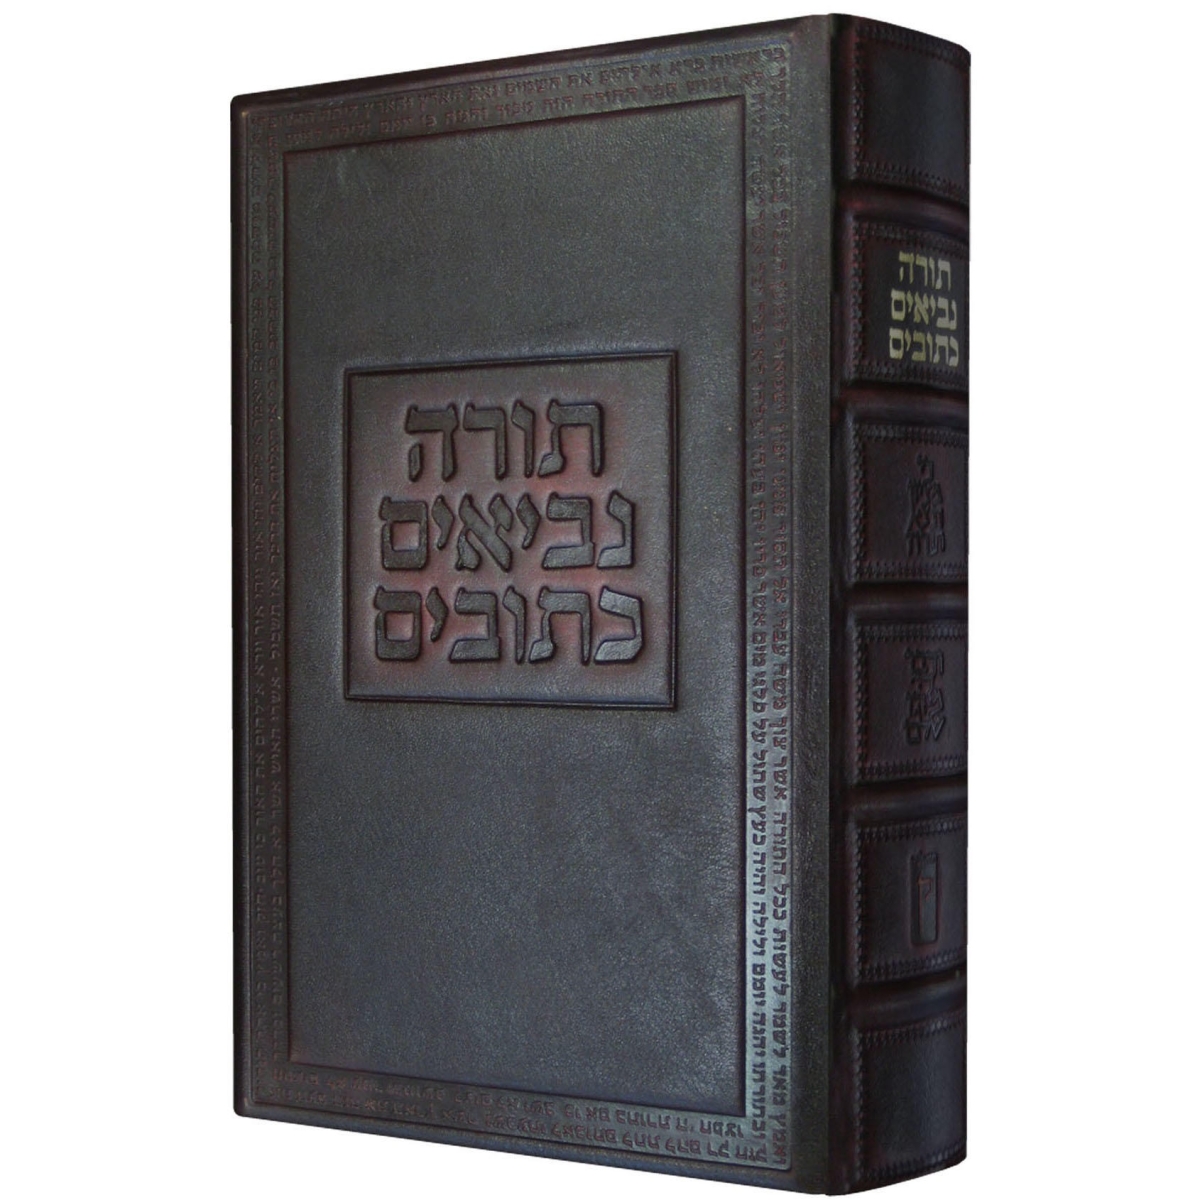  The Koren Reader's Tanakh. The Authoritative Edition (Handcrafted Brown Leather) - 1